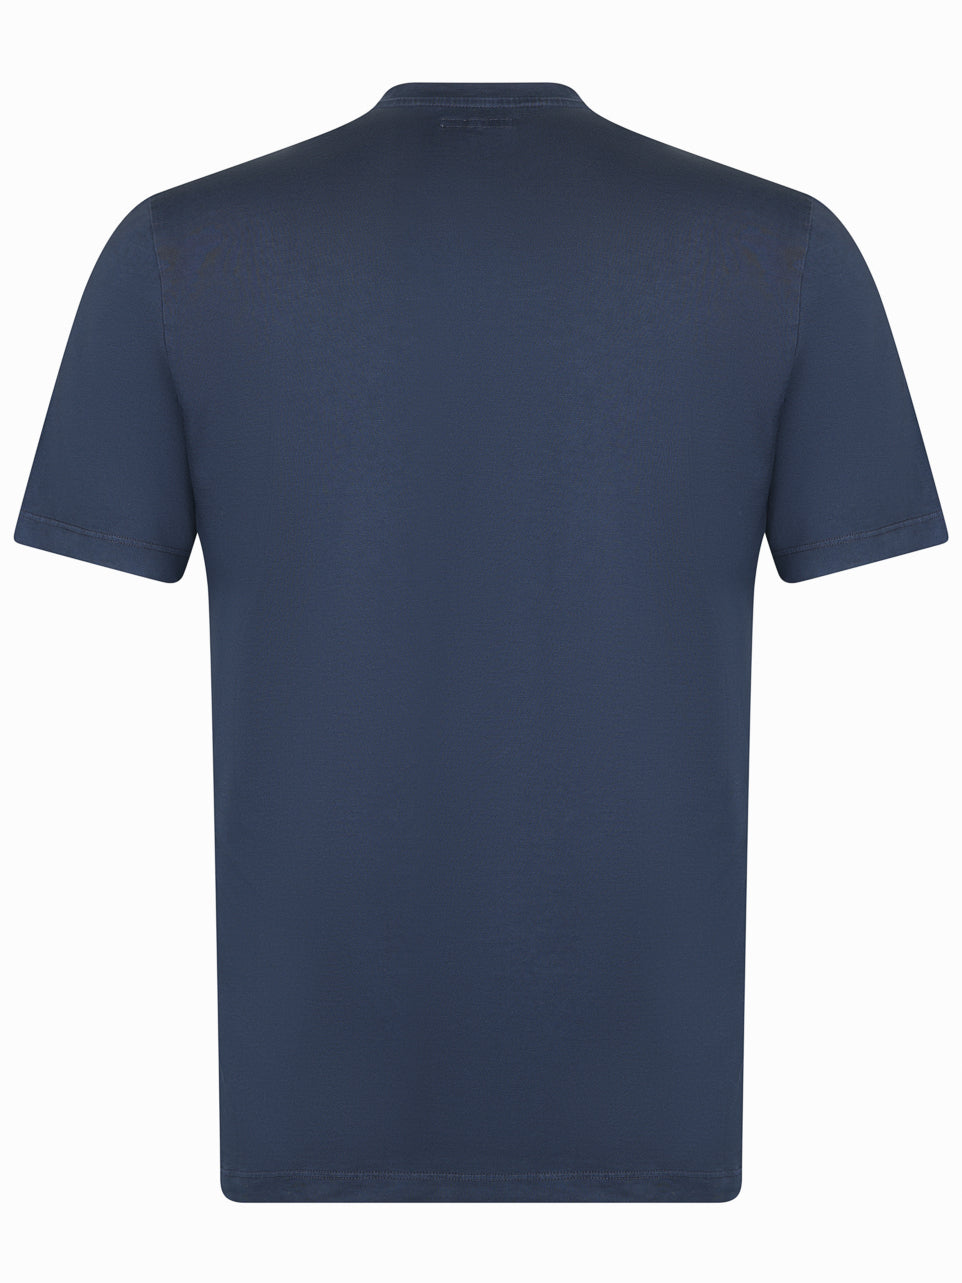 Load image into Gallery viewer, Jacob Cohen Small Print Logo Tee Navy
